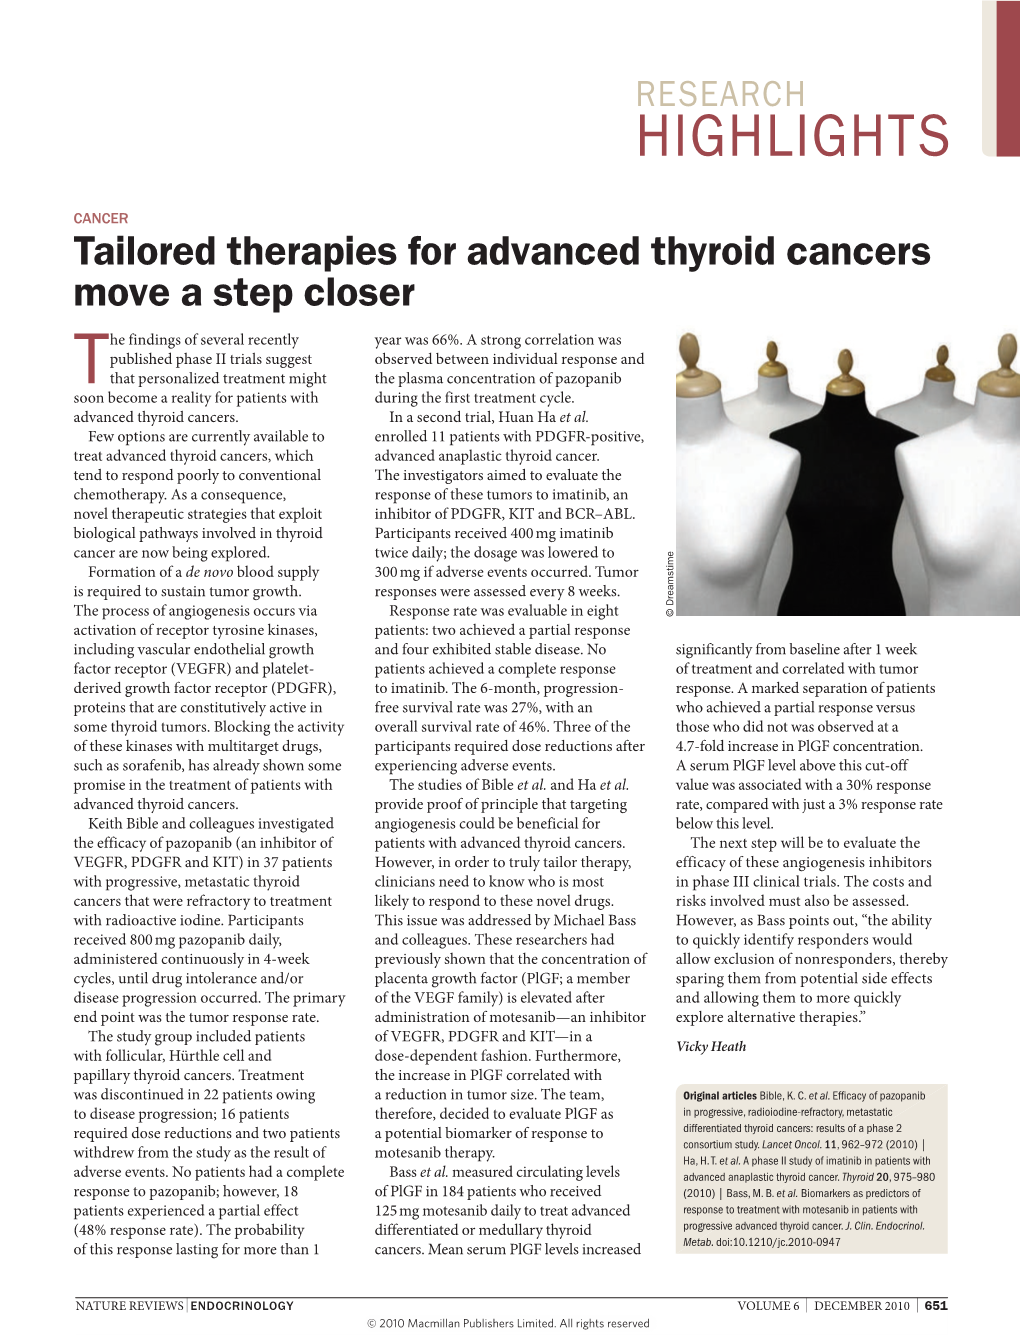 Tailored Therapies for Advanced Thyroid Cancers Move a Step Closer